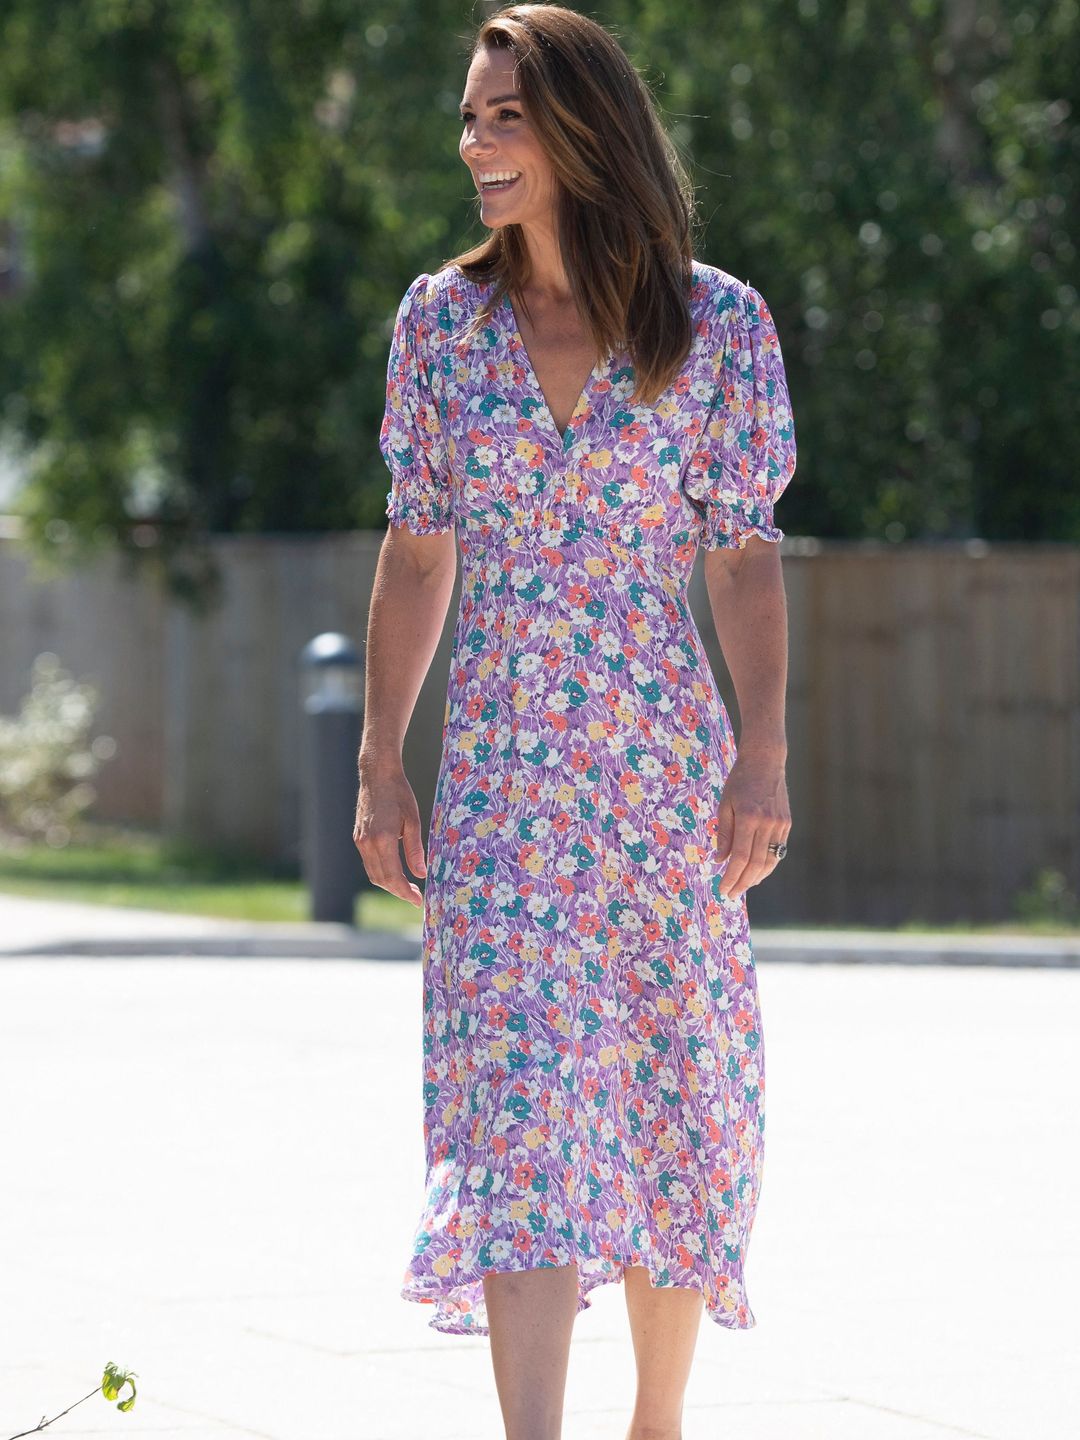 Britain's Catherine, Duchess of Cambridge, visits The Nook in the village of Framlingham Earl wearing Faithfull the Brand